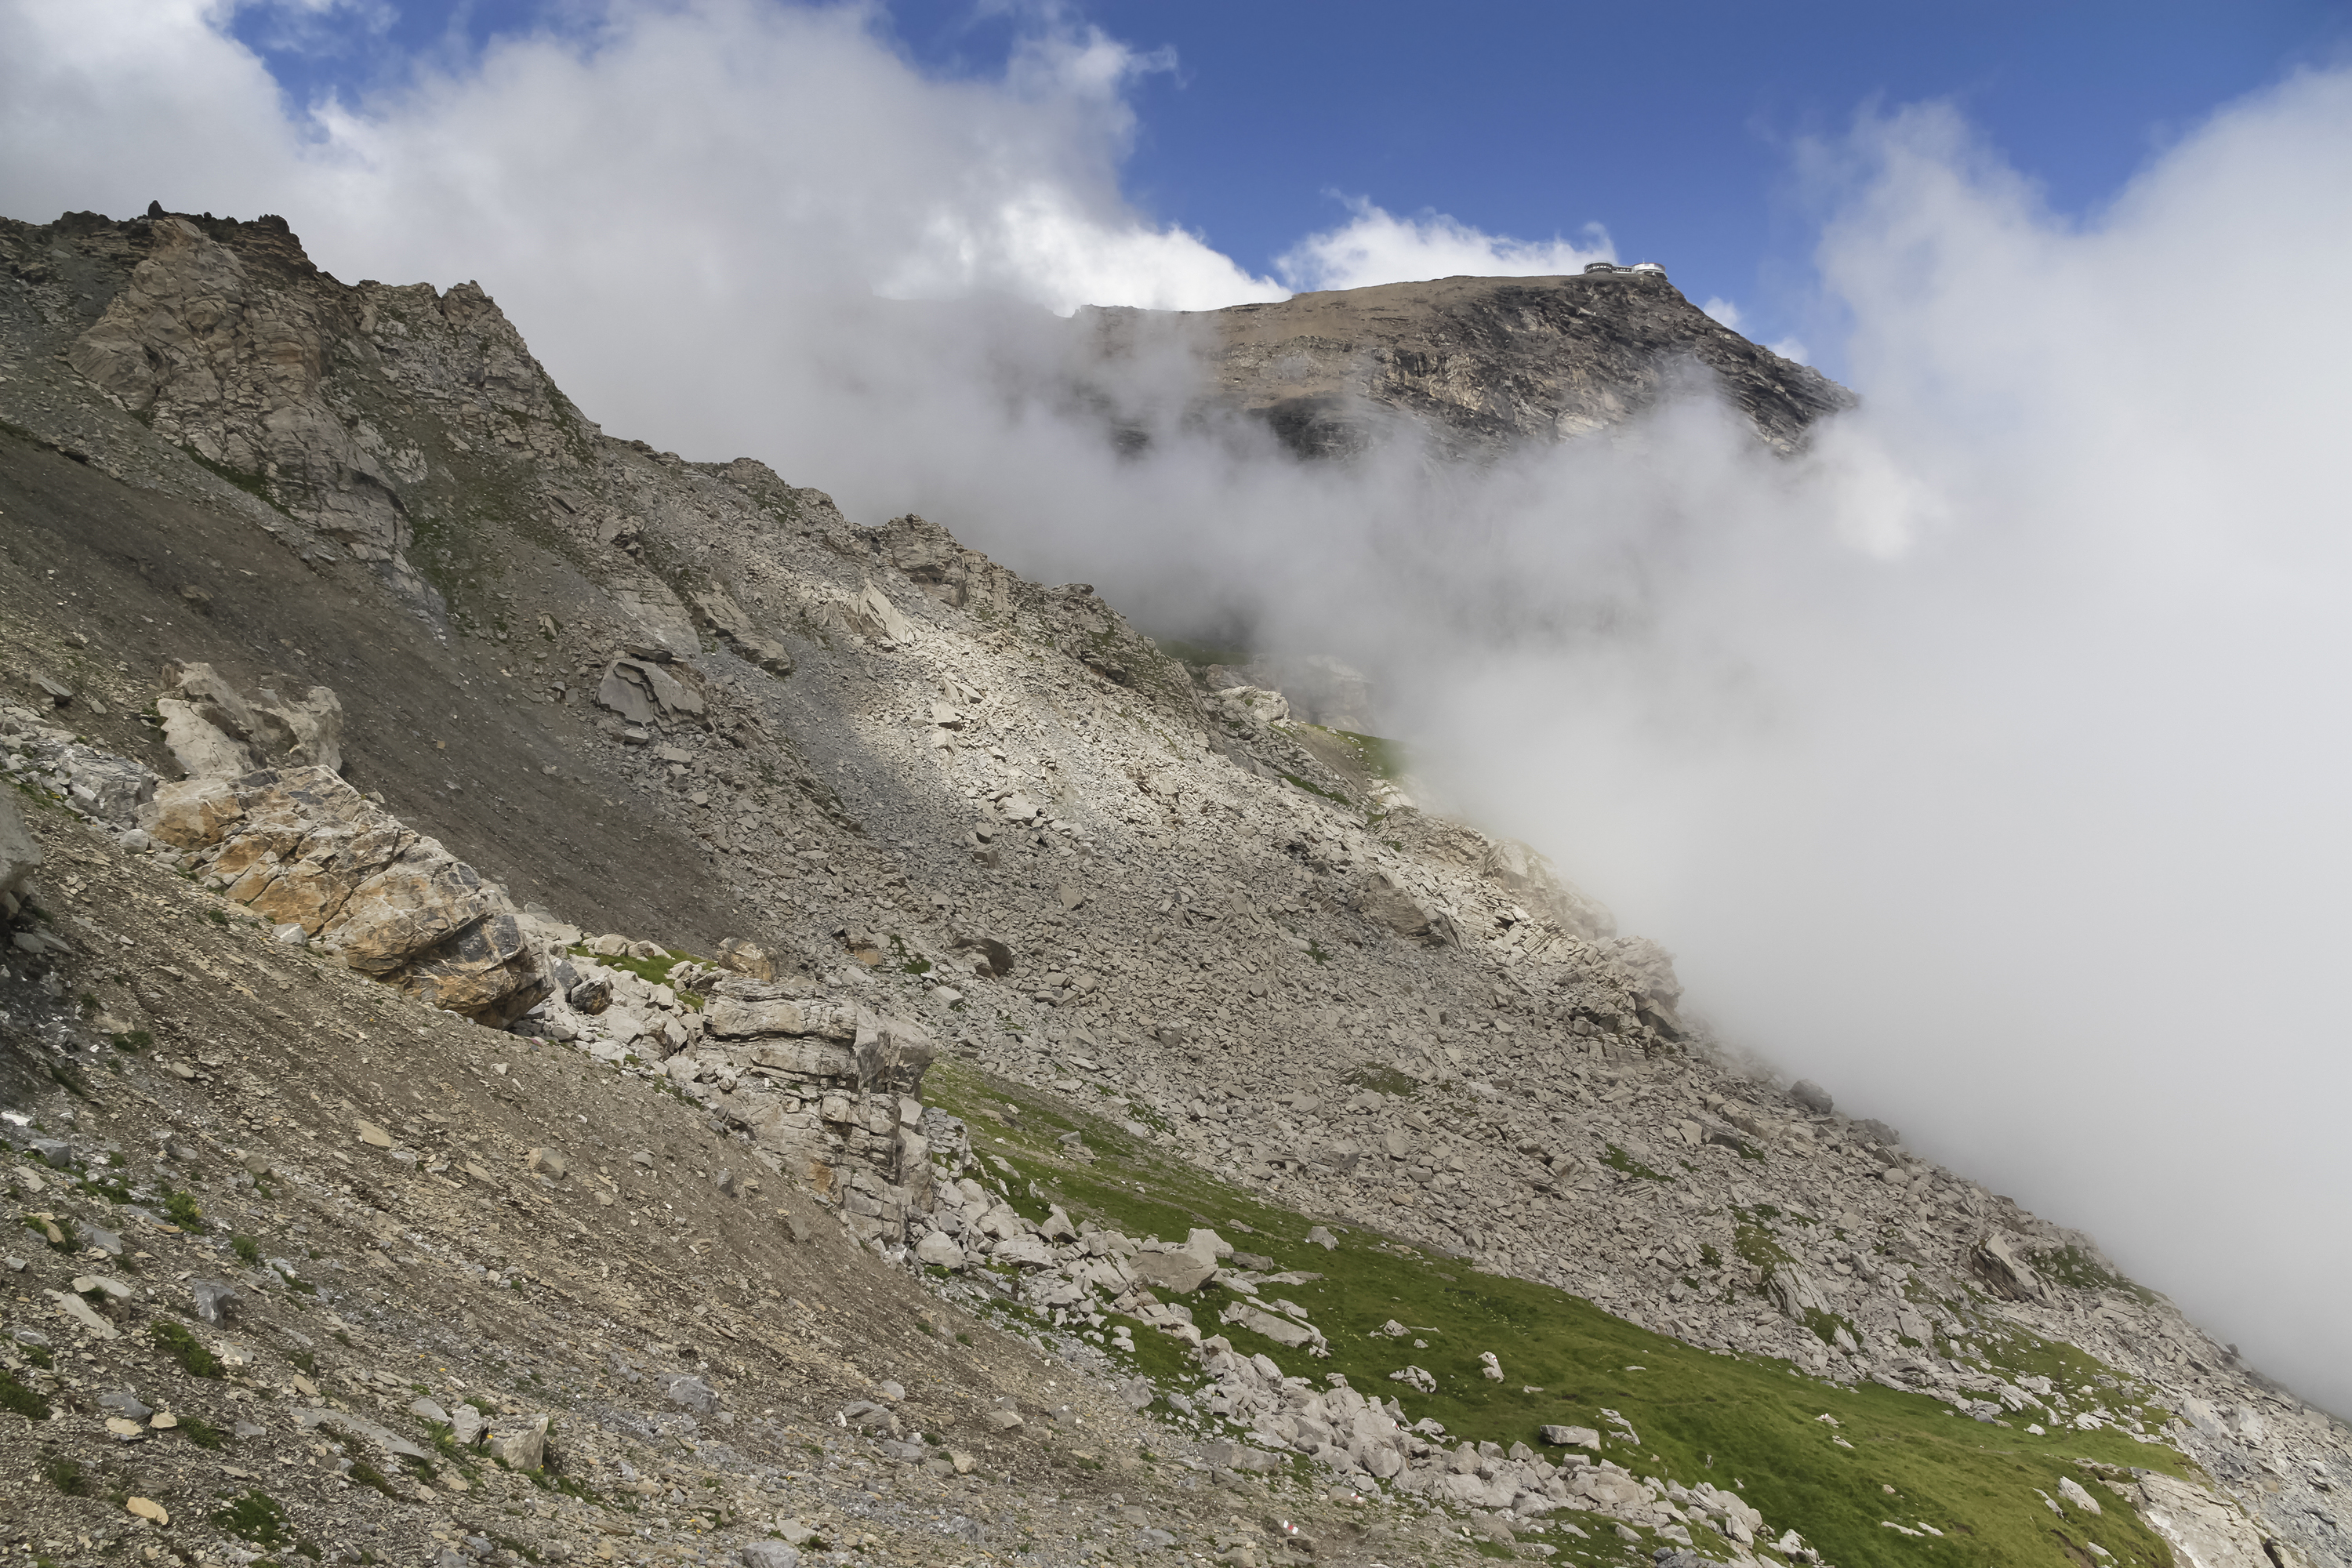 Summit of Schilthorn reveals itself above the clouds in 2012 August